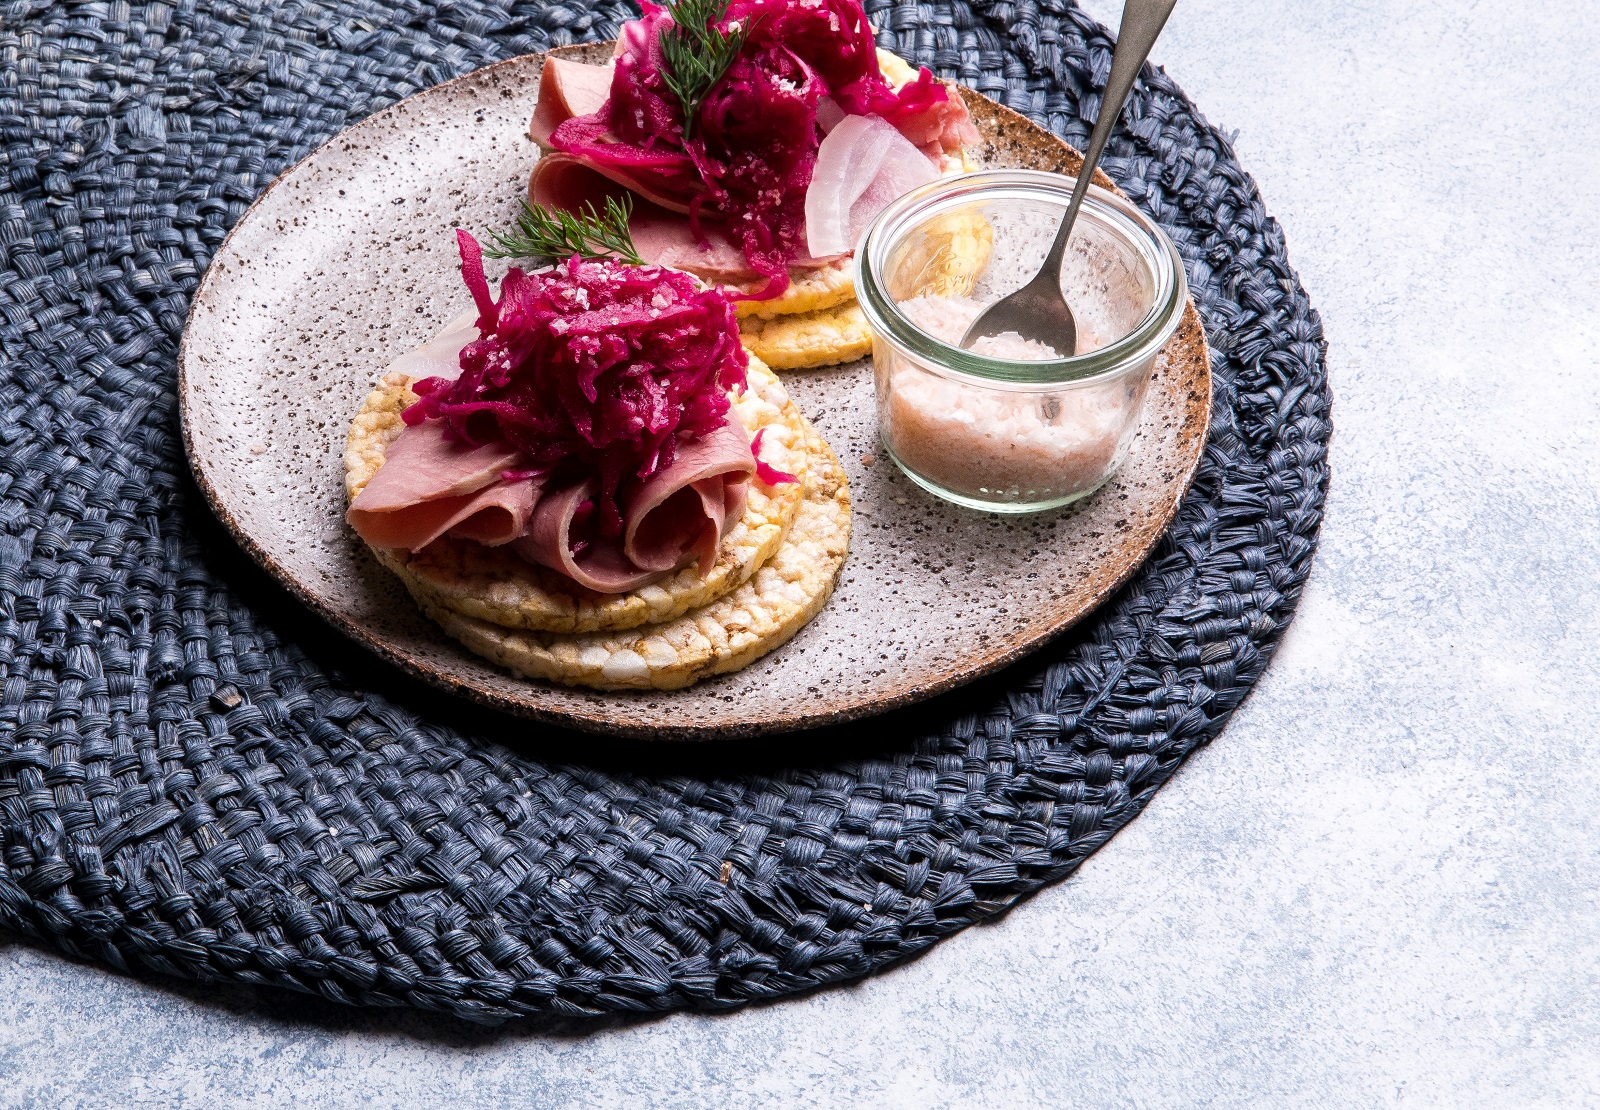 Lunch toppings recipe - CORN THINS with Corned Beef, Red Beetroot Salad, Pickled Onion & Dill